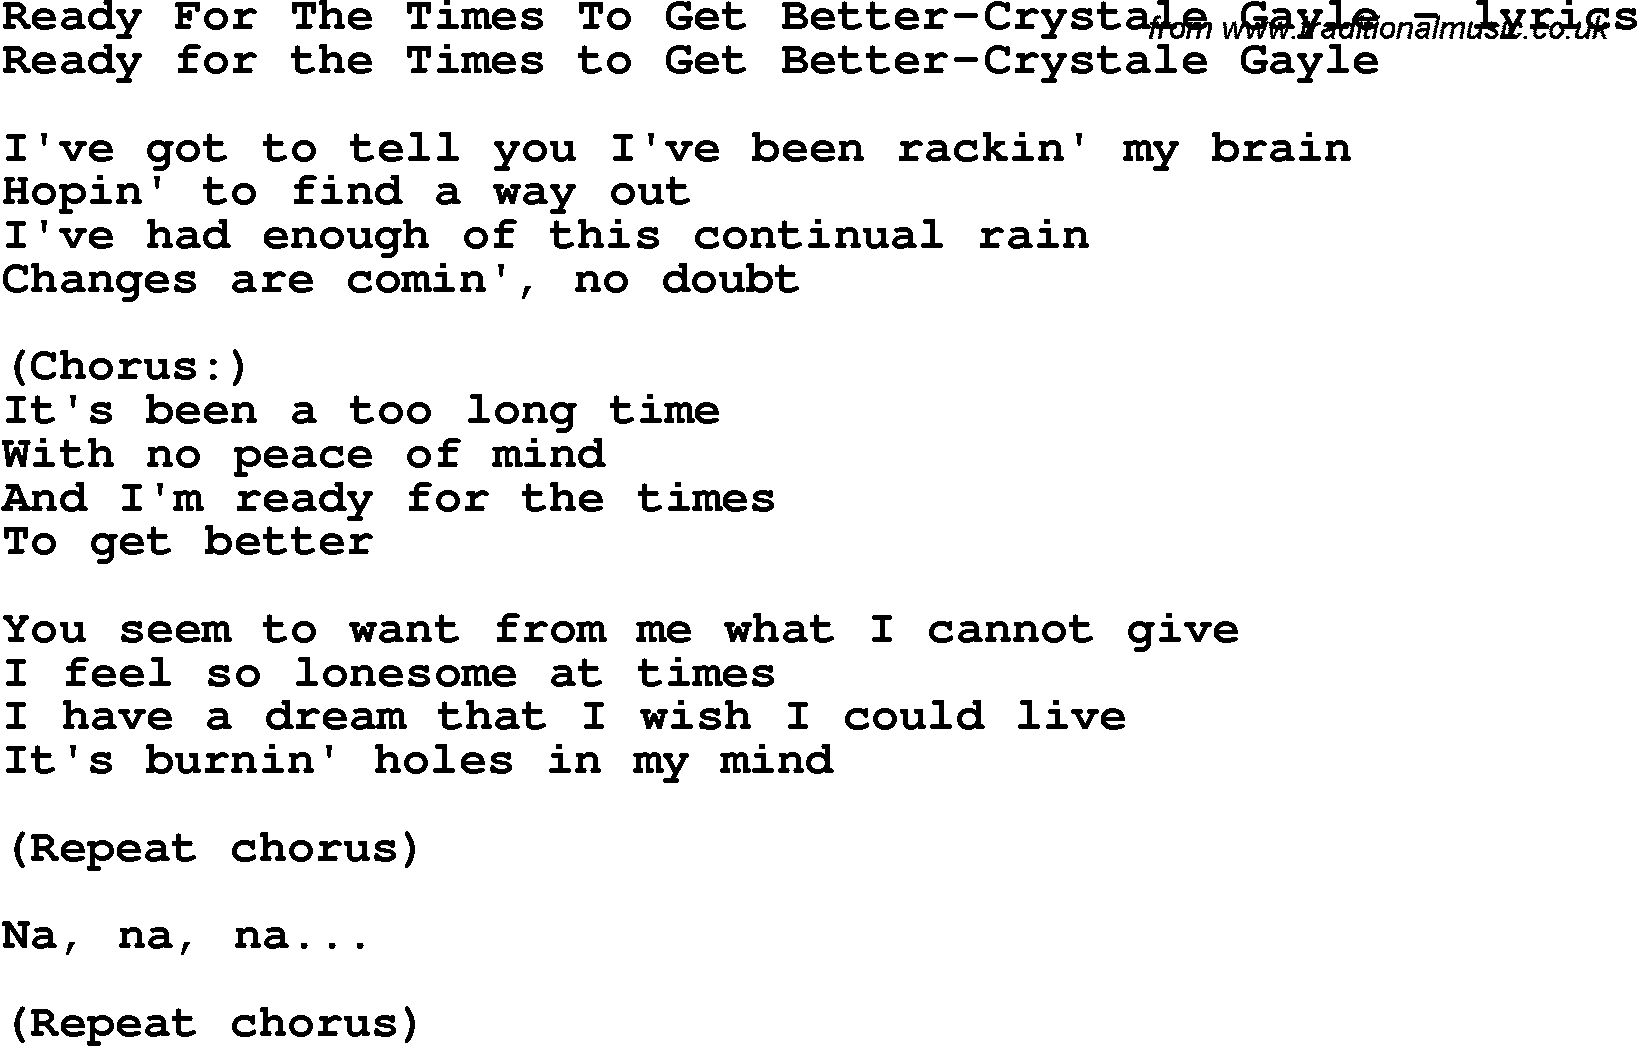 Love Song Lyrics for: Ready For The Times To Get Better-Crystale Gayle